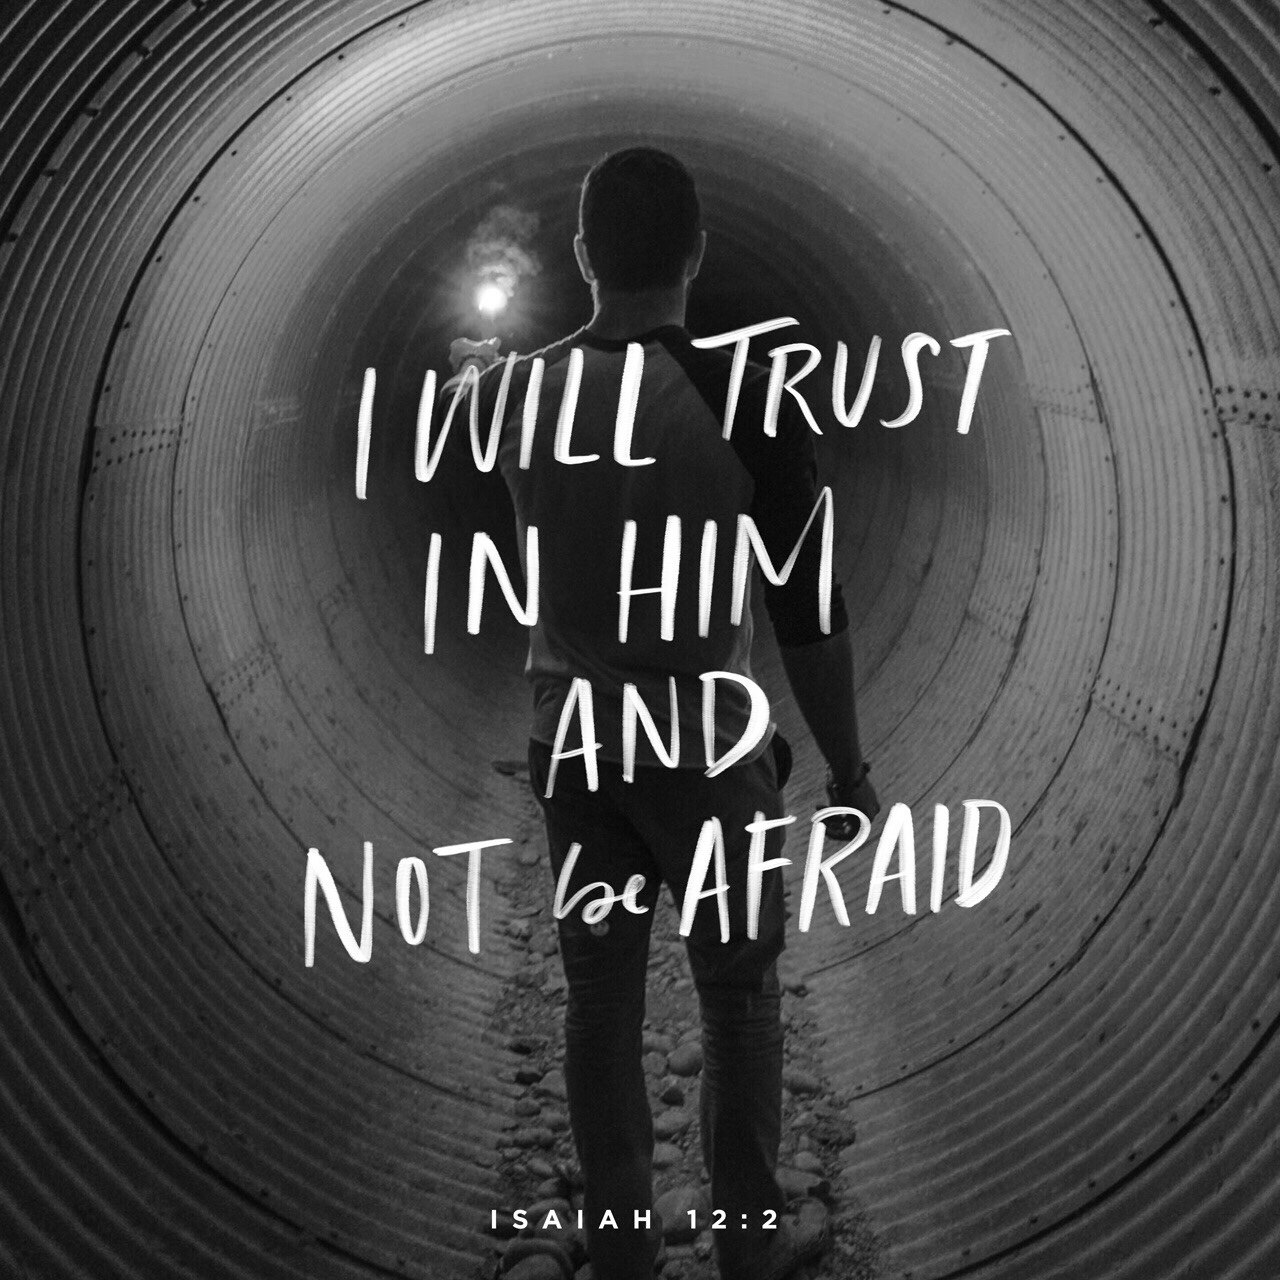 VOTD September 4 - Behold, God is my salvation, I will trust and not be afraid; For the LORD GOD is my strength and song, And He has become my salvation. Isaiah 12:2